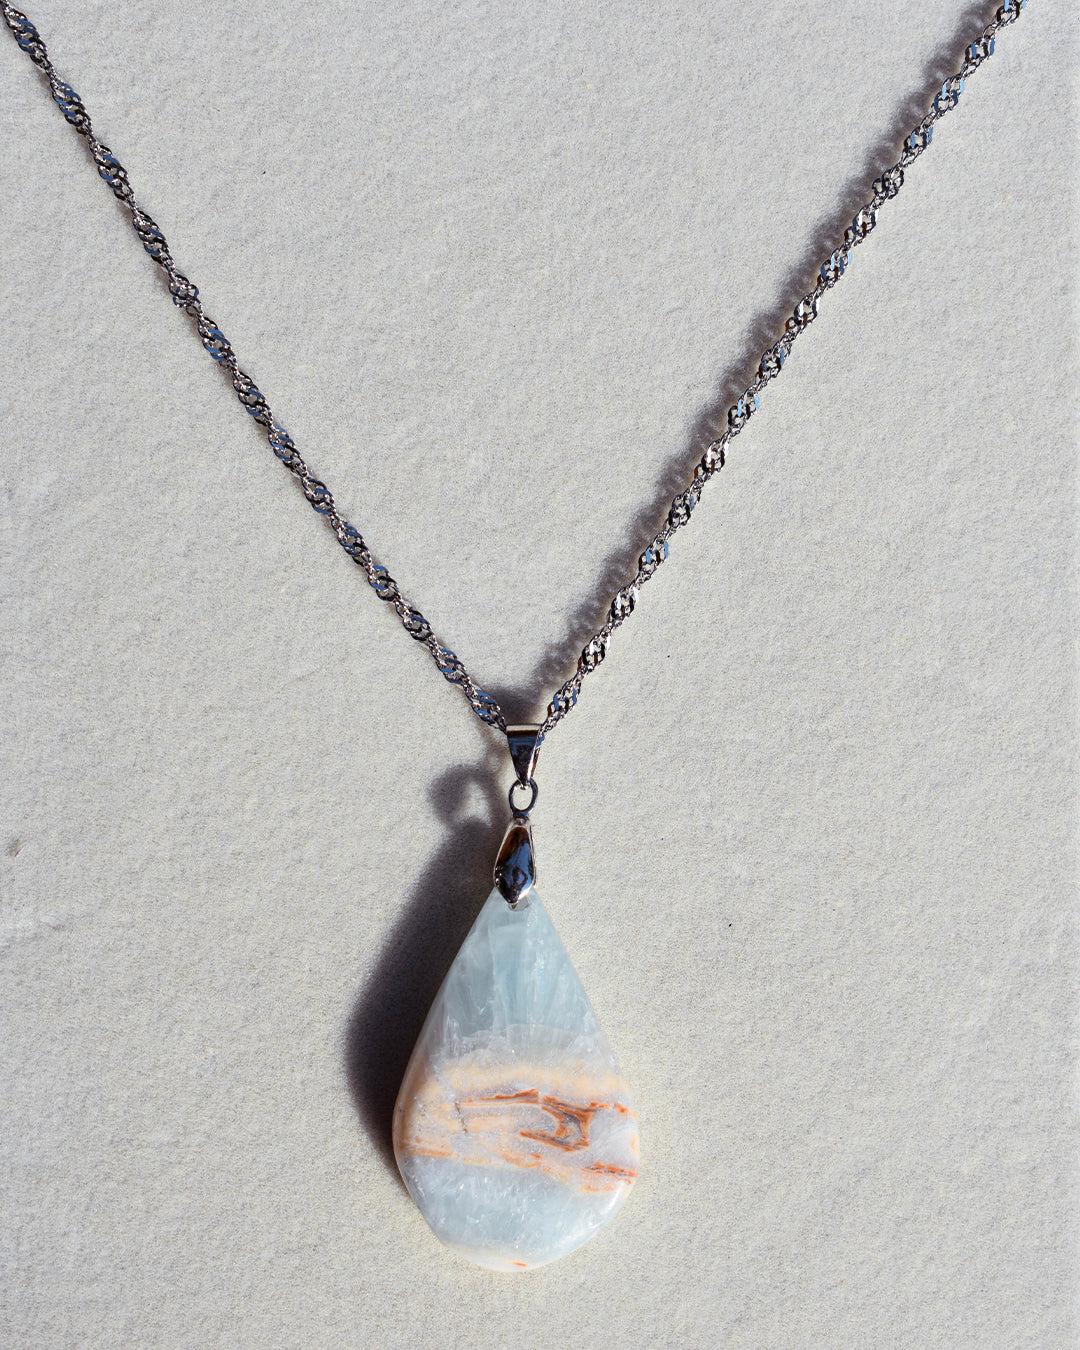 Stainless Steel chain with Caribbean Blue Calcite crystal pendant